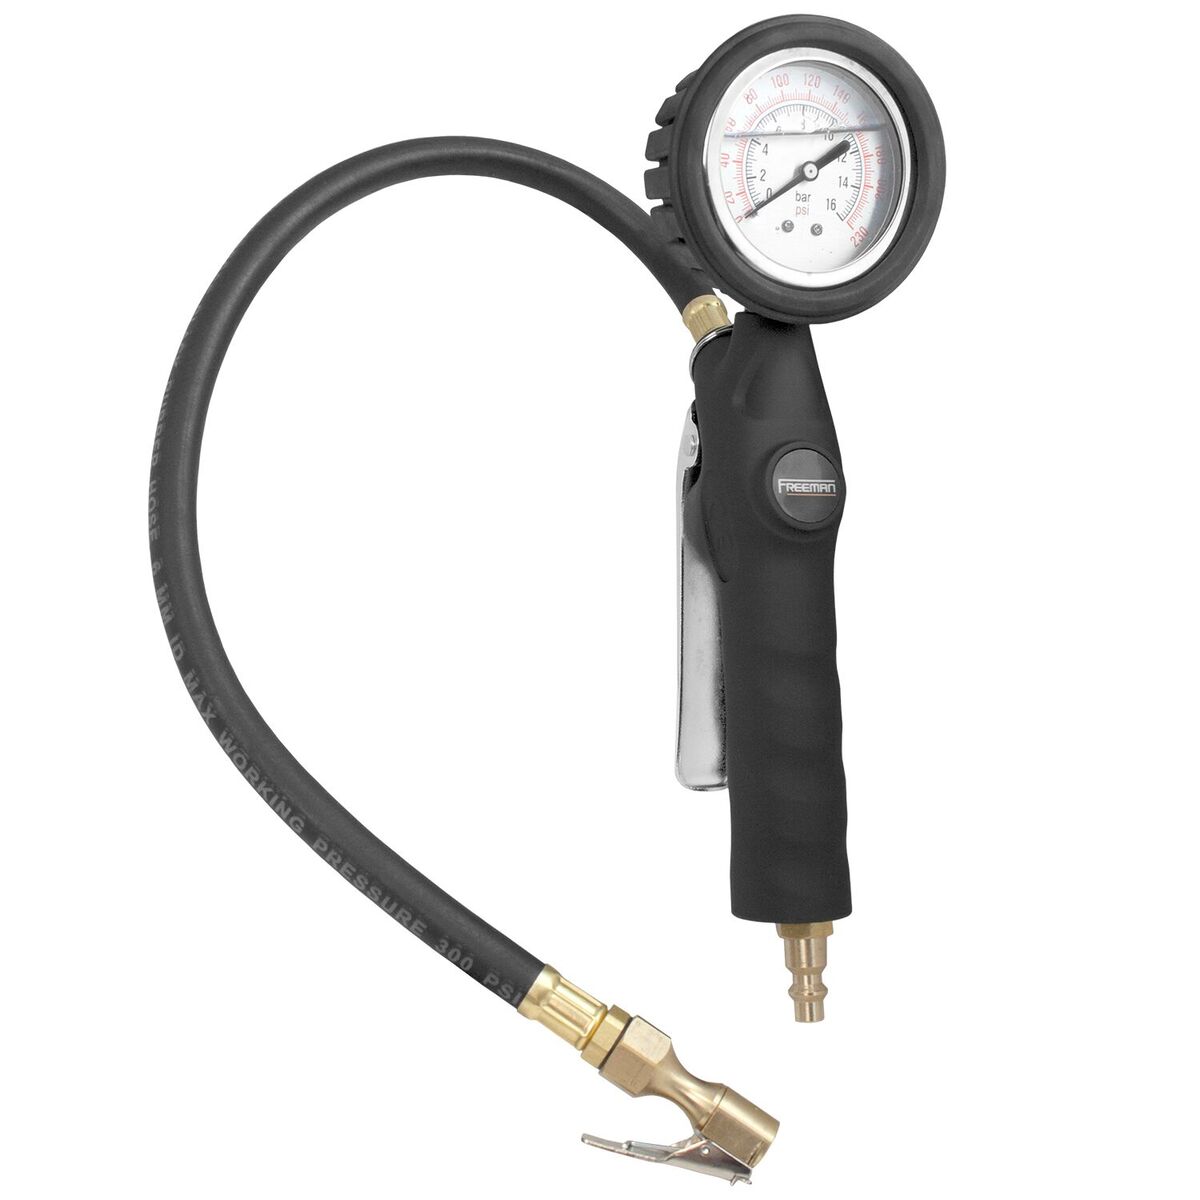 Fs4ati Analog Tire Inflator With Oil-filled Pressure Gauge